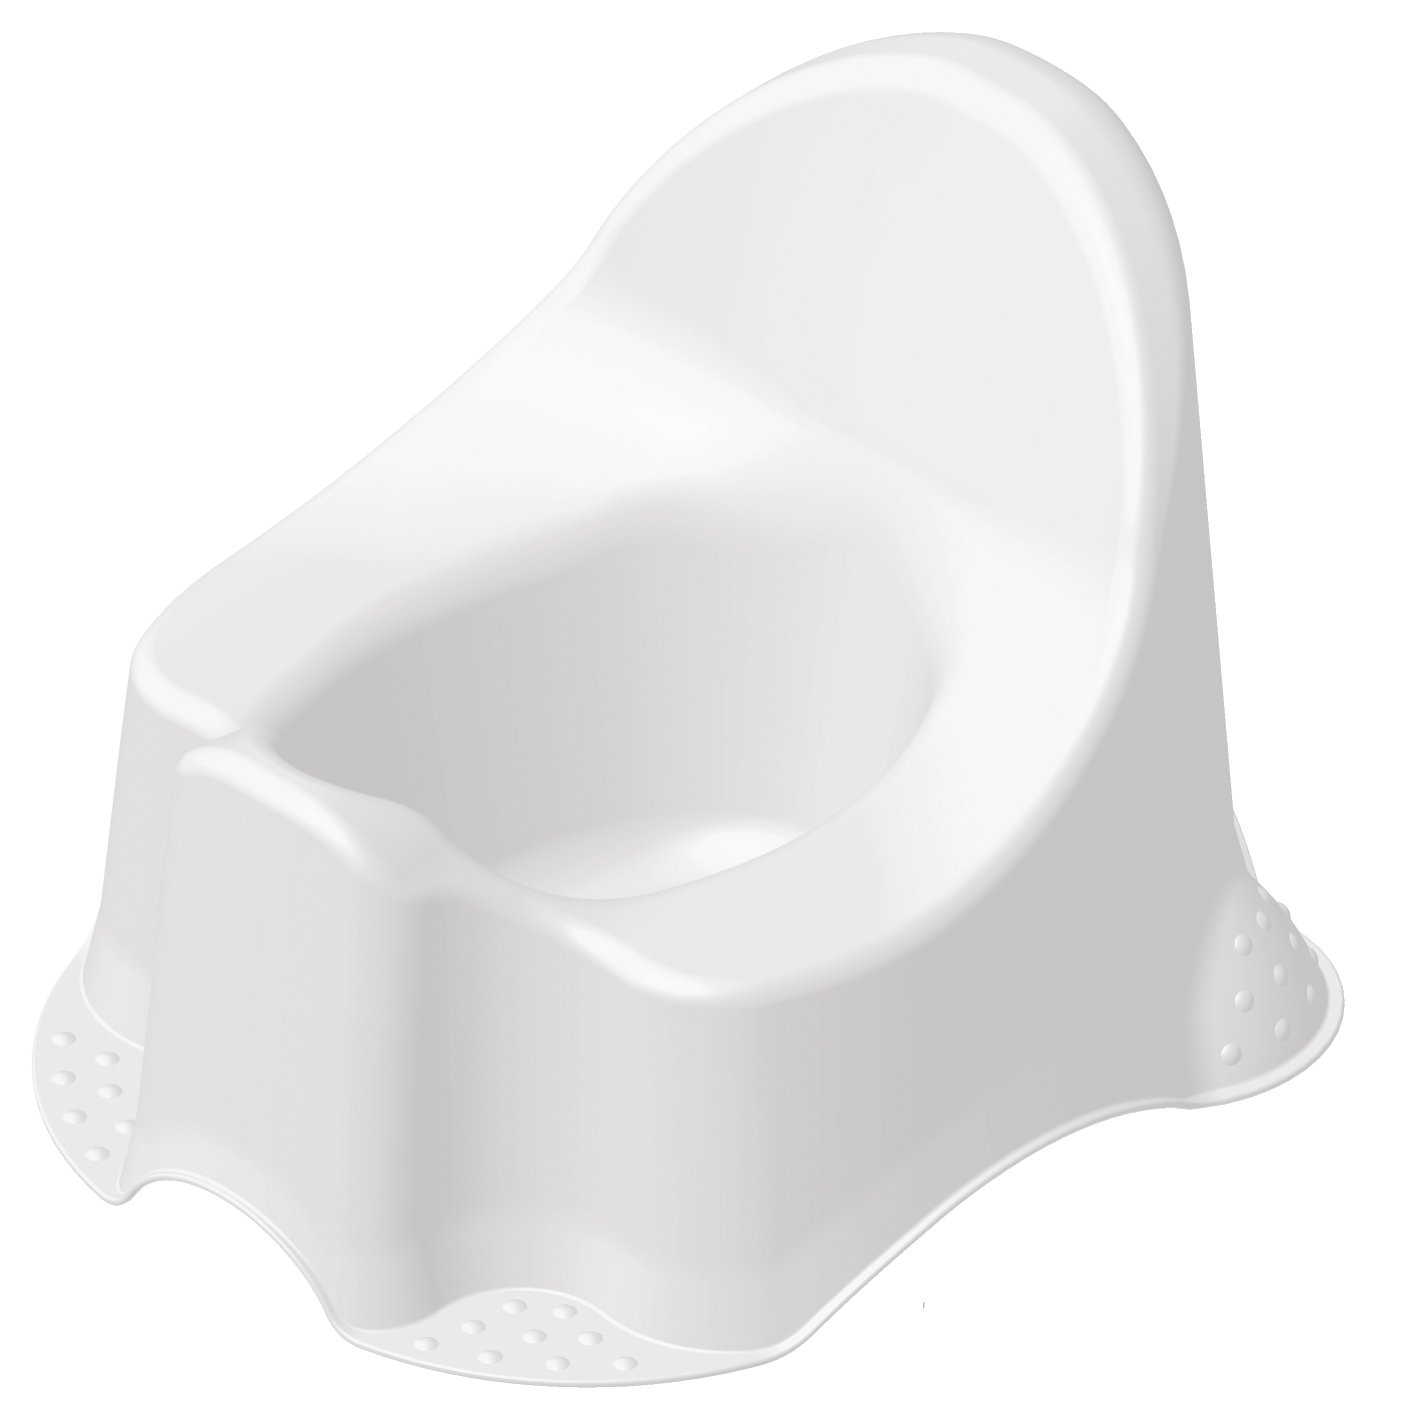 Comfort Potty Review